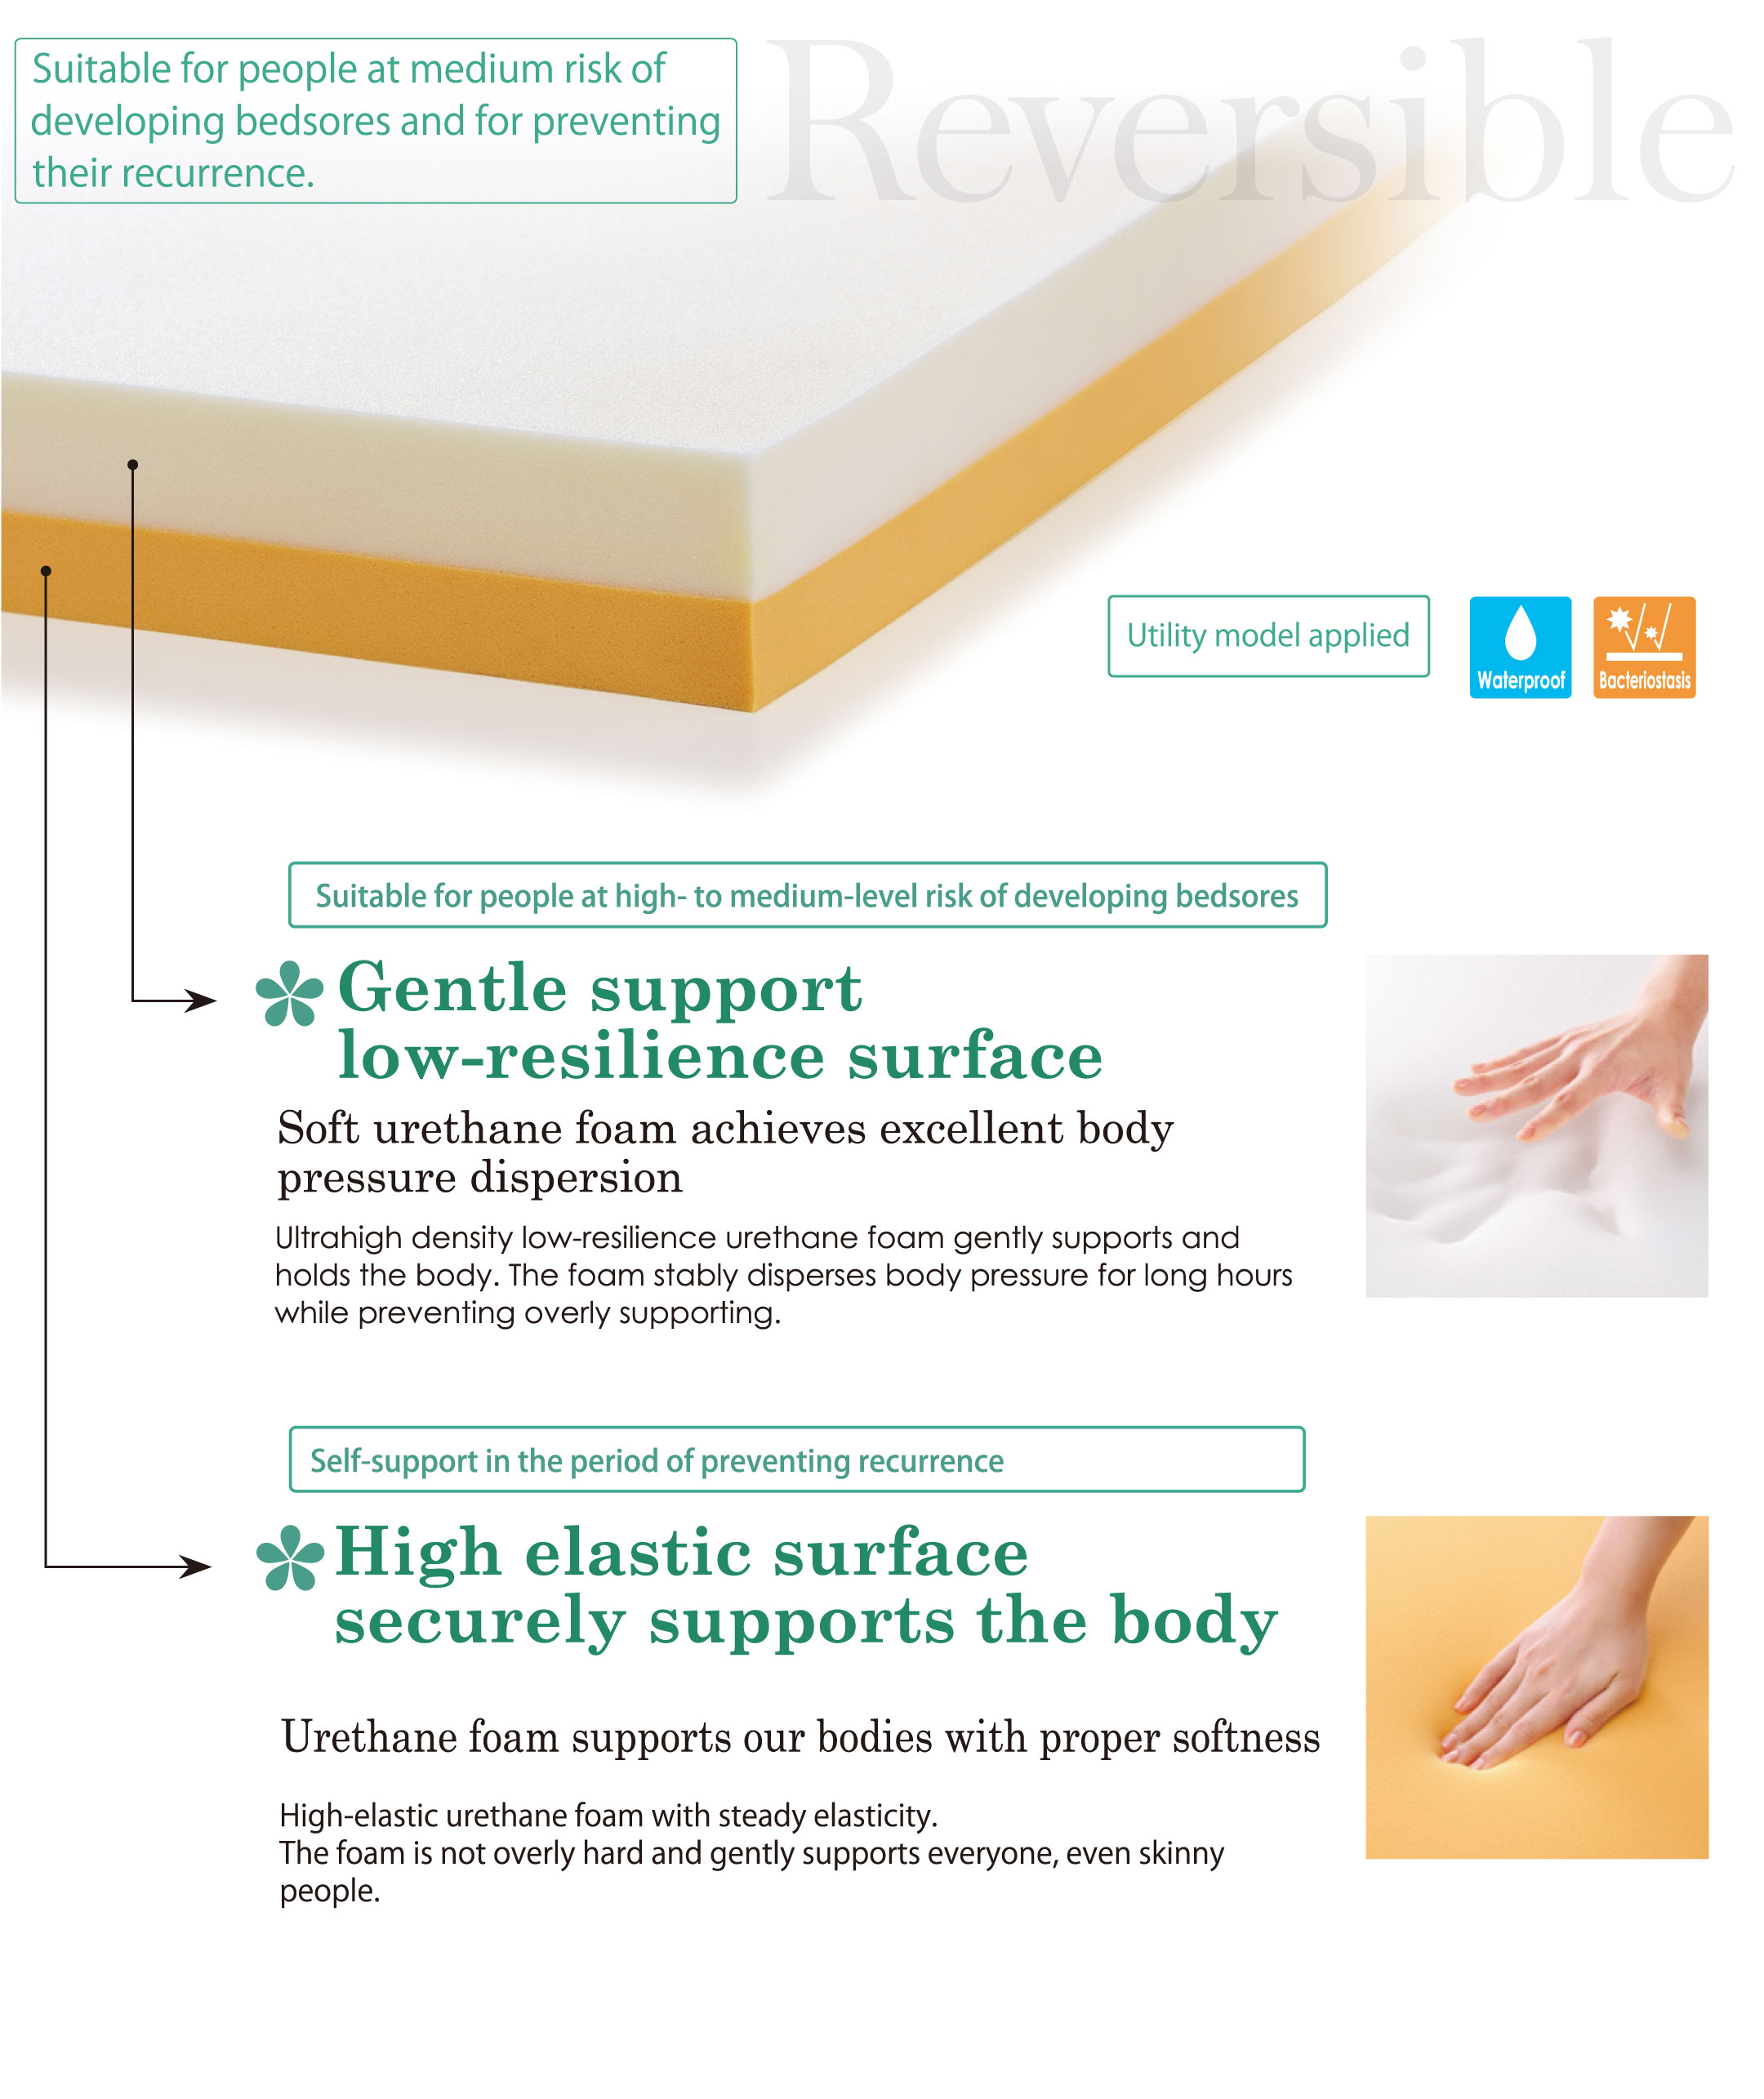 Gentle support low-resilience surface. High elastic surface securely supports the body.